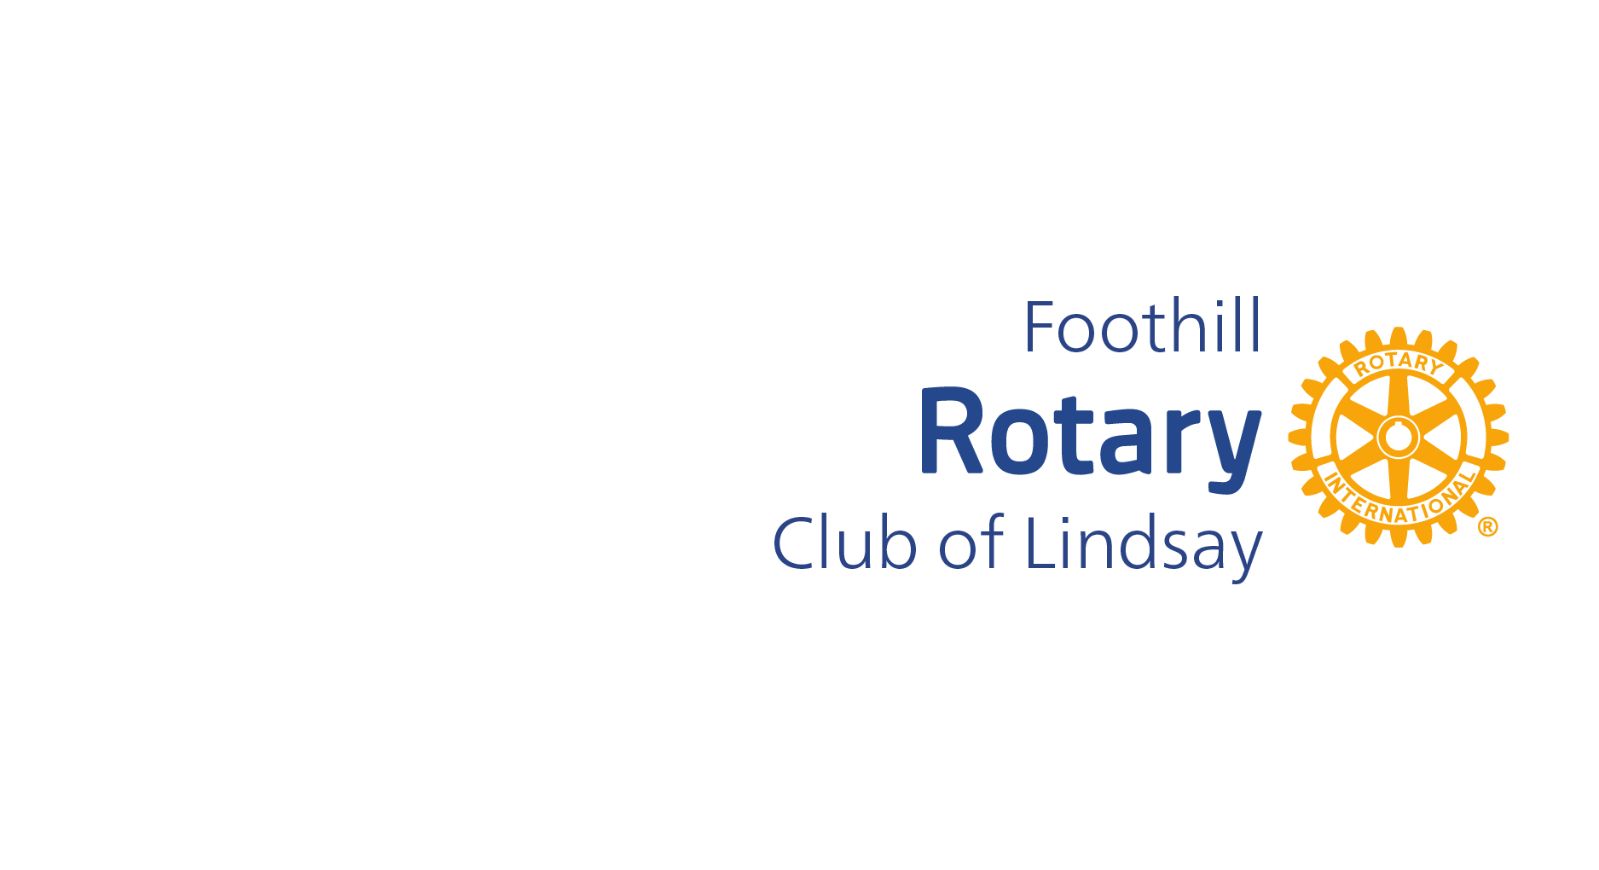 Foothill Rotary Club of Lindsay Logo